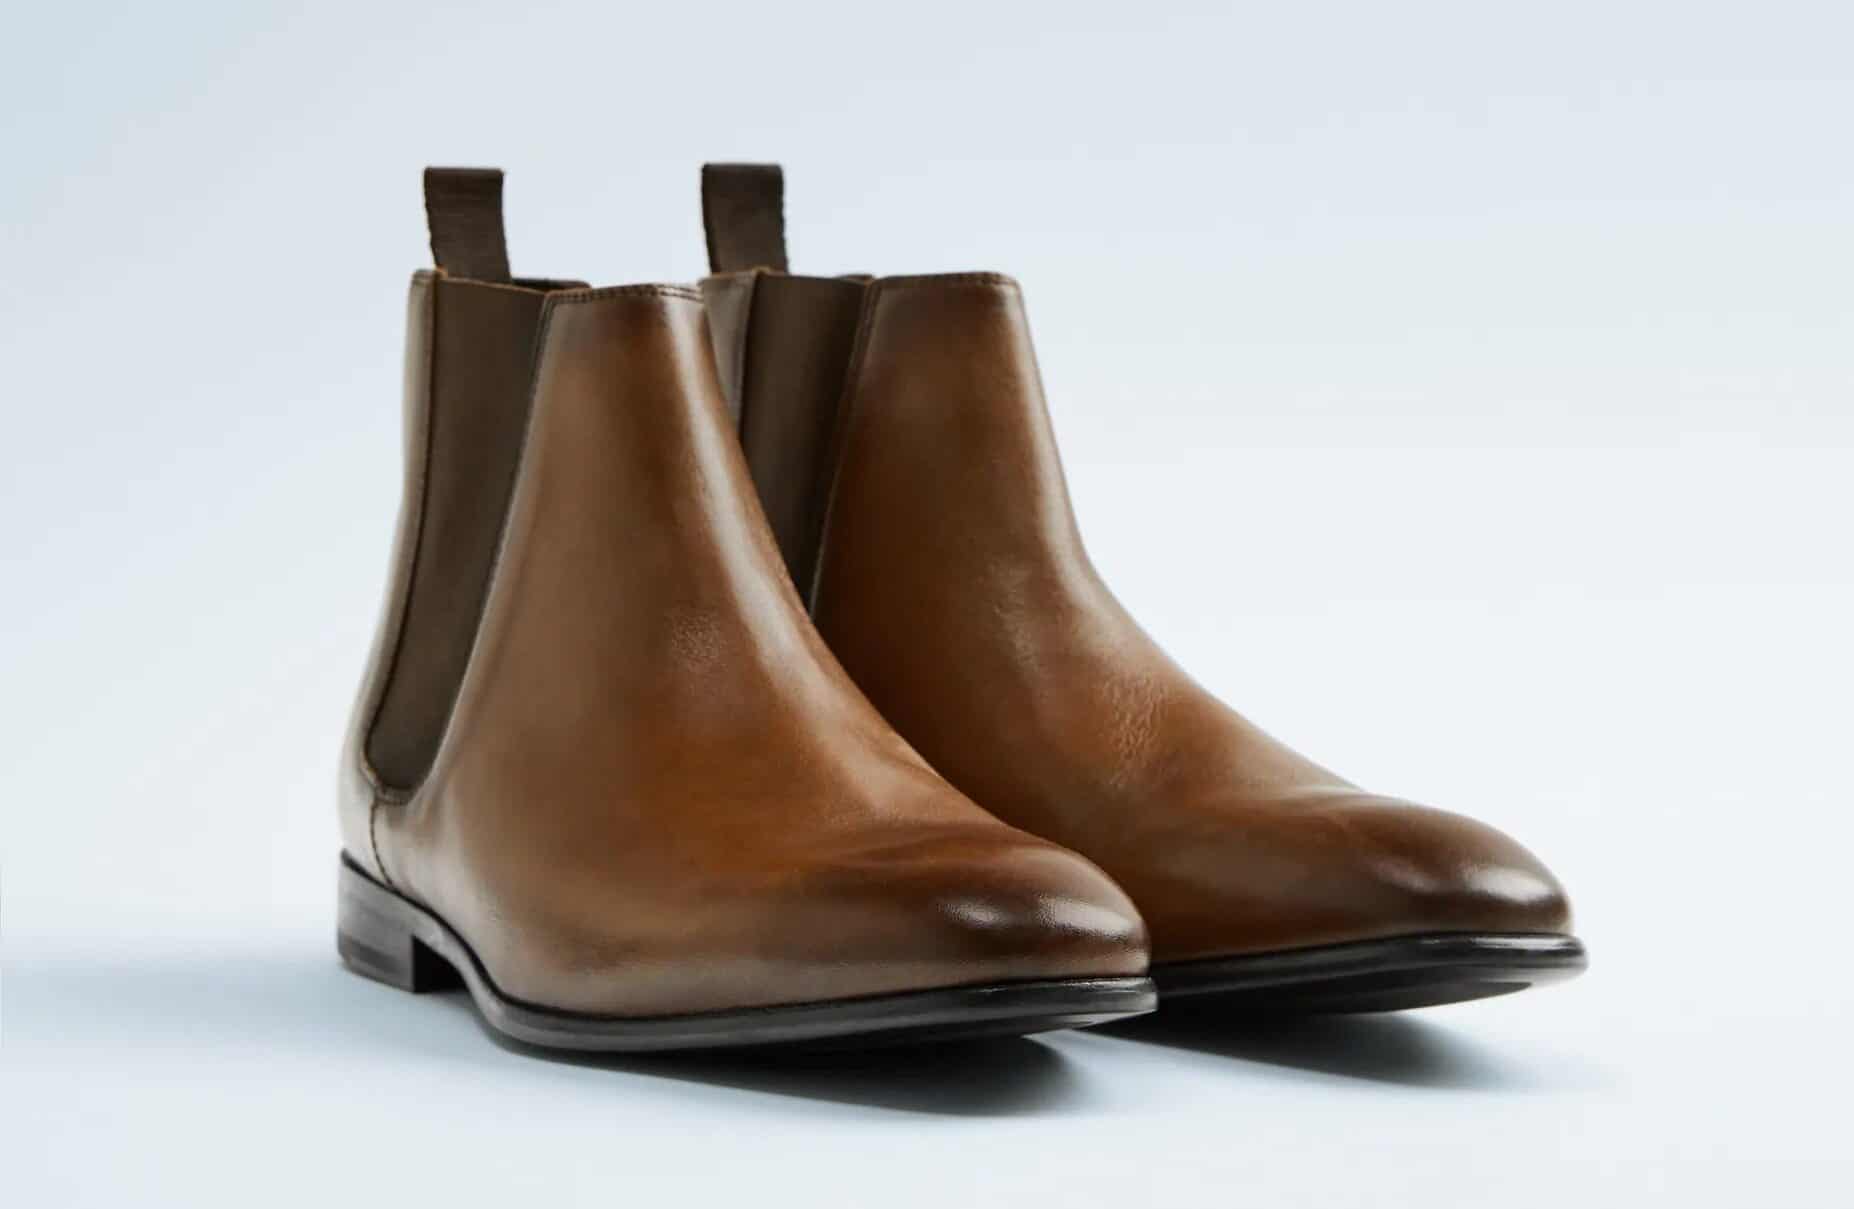 Chelsea Boots for Any Budget 